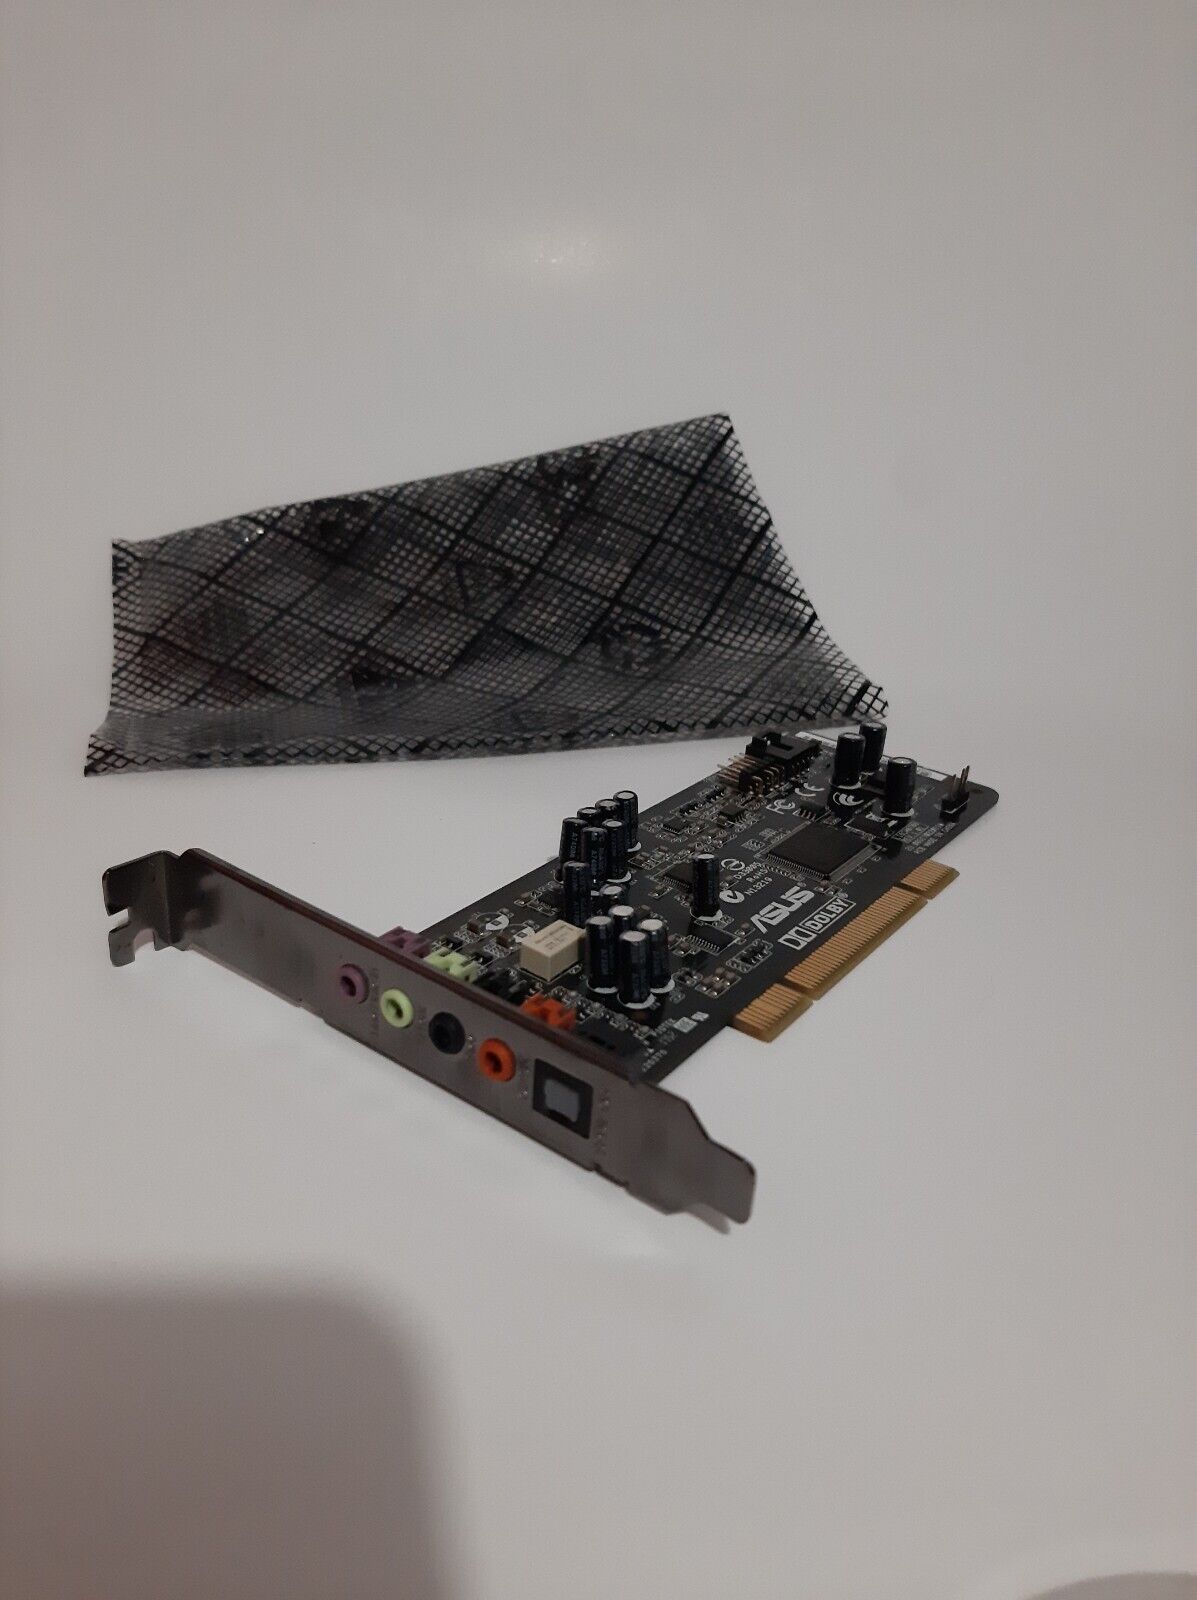 ASUS Xonar DG Gaming Series PCI 5.1 Sound Card AS IS UNTESTED for parts